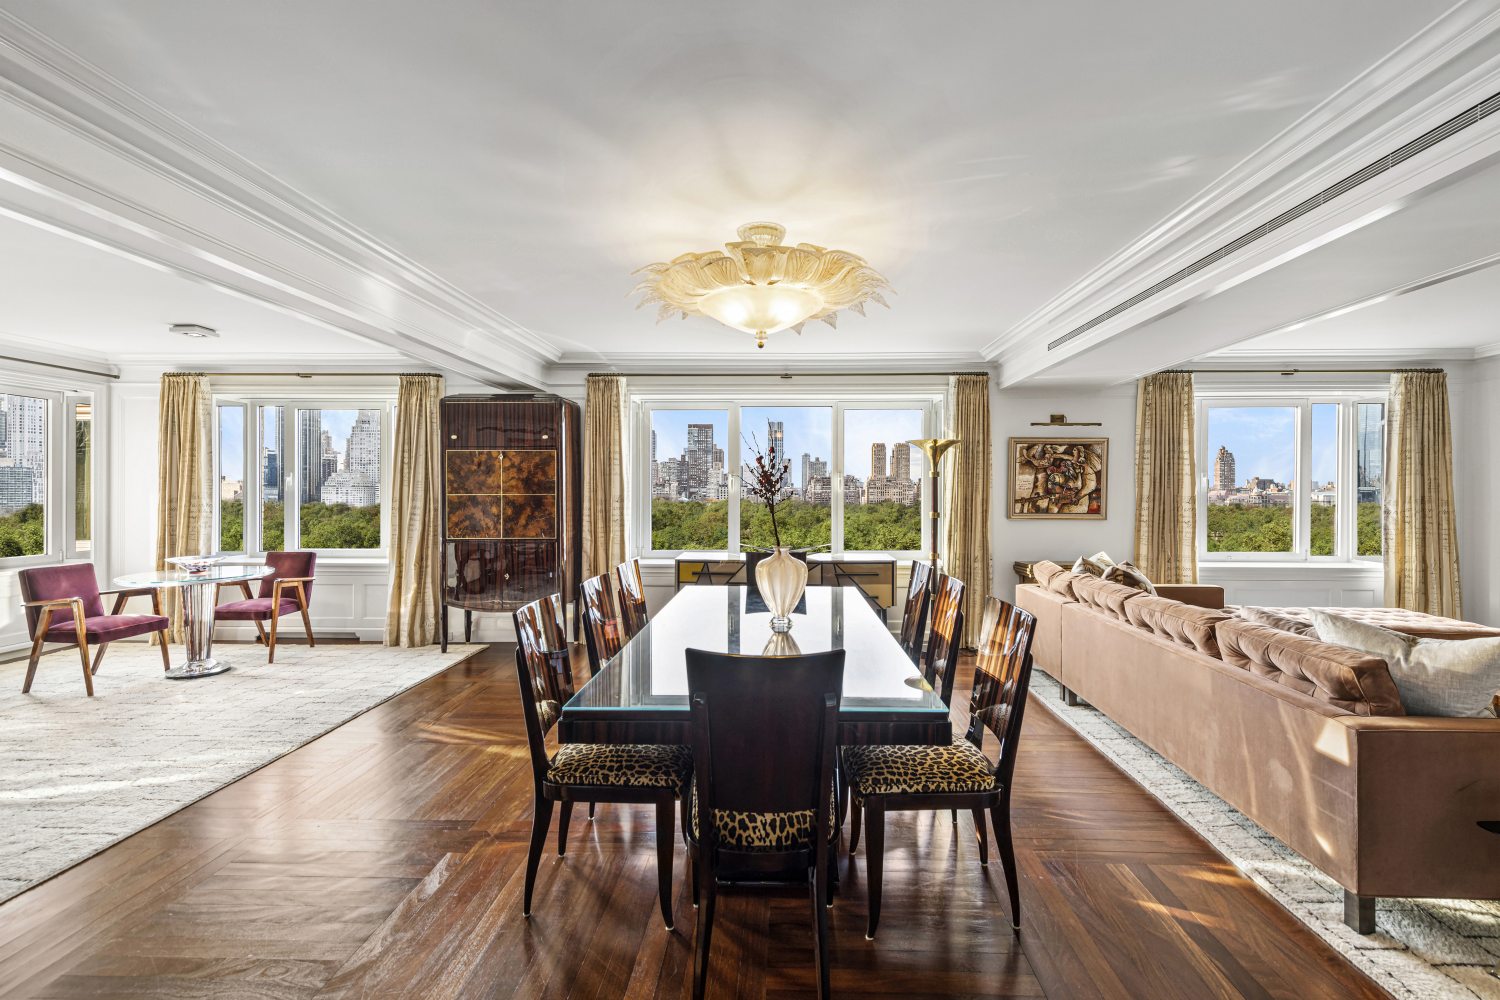 880 5th Avenue 16Bc, Lenox Hill, Upper East Side, NYC - 4 Bedrooms  
5.5 Bathrooms  
8 Rooms - 